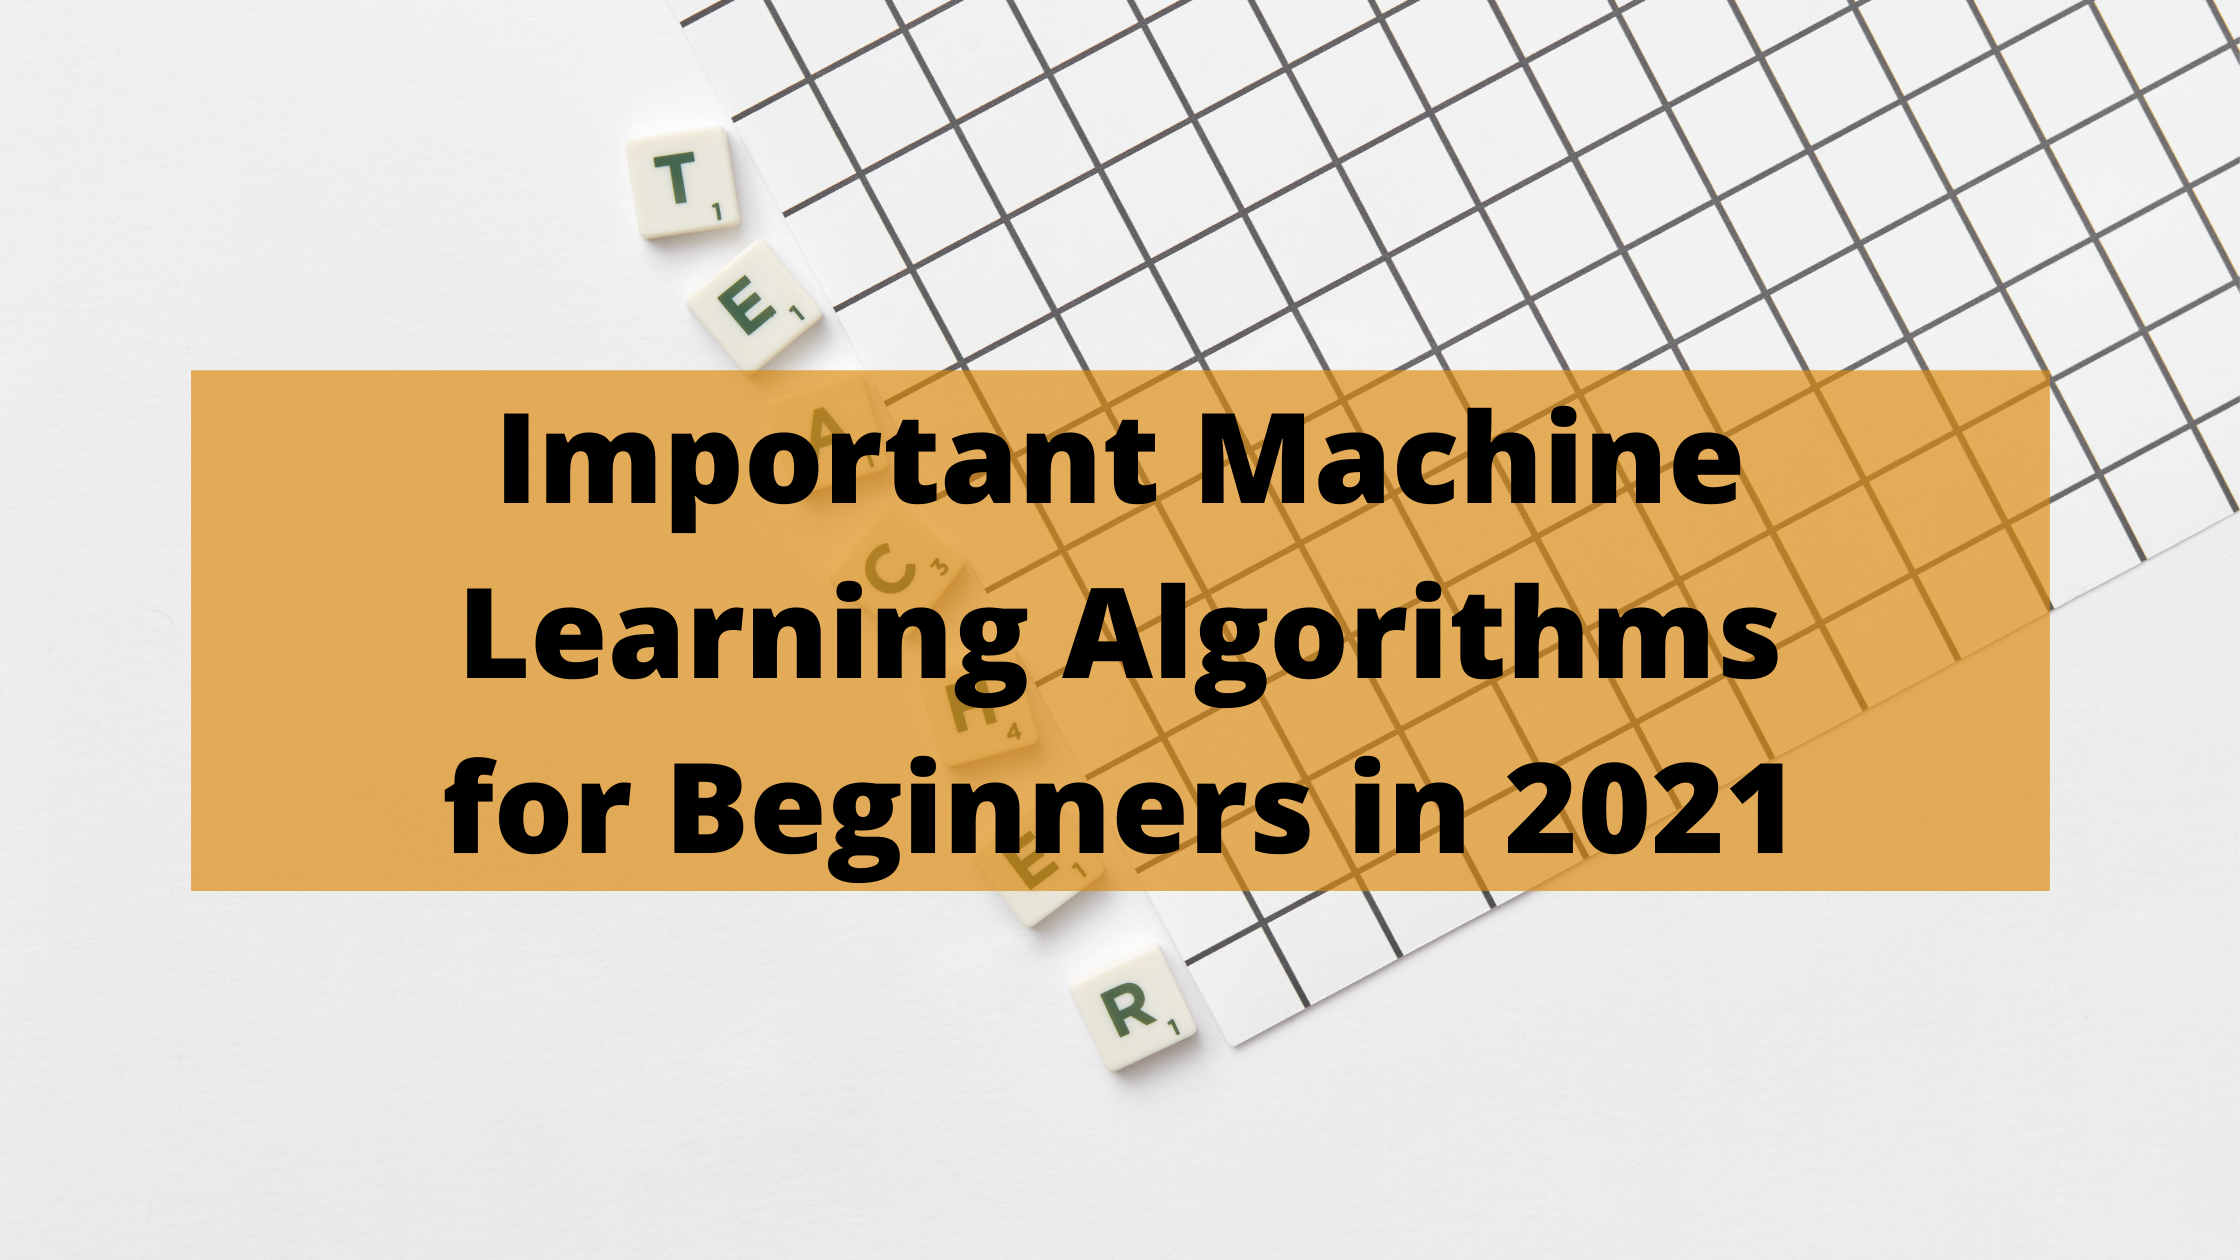 Important Machine Learning Algorithms for Beginners in 2021